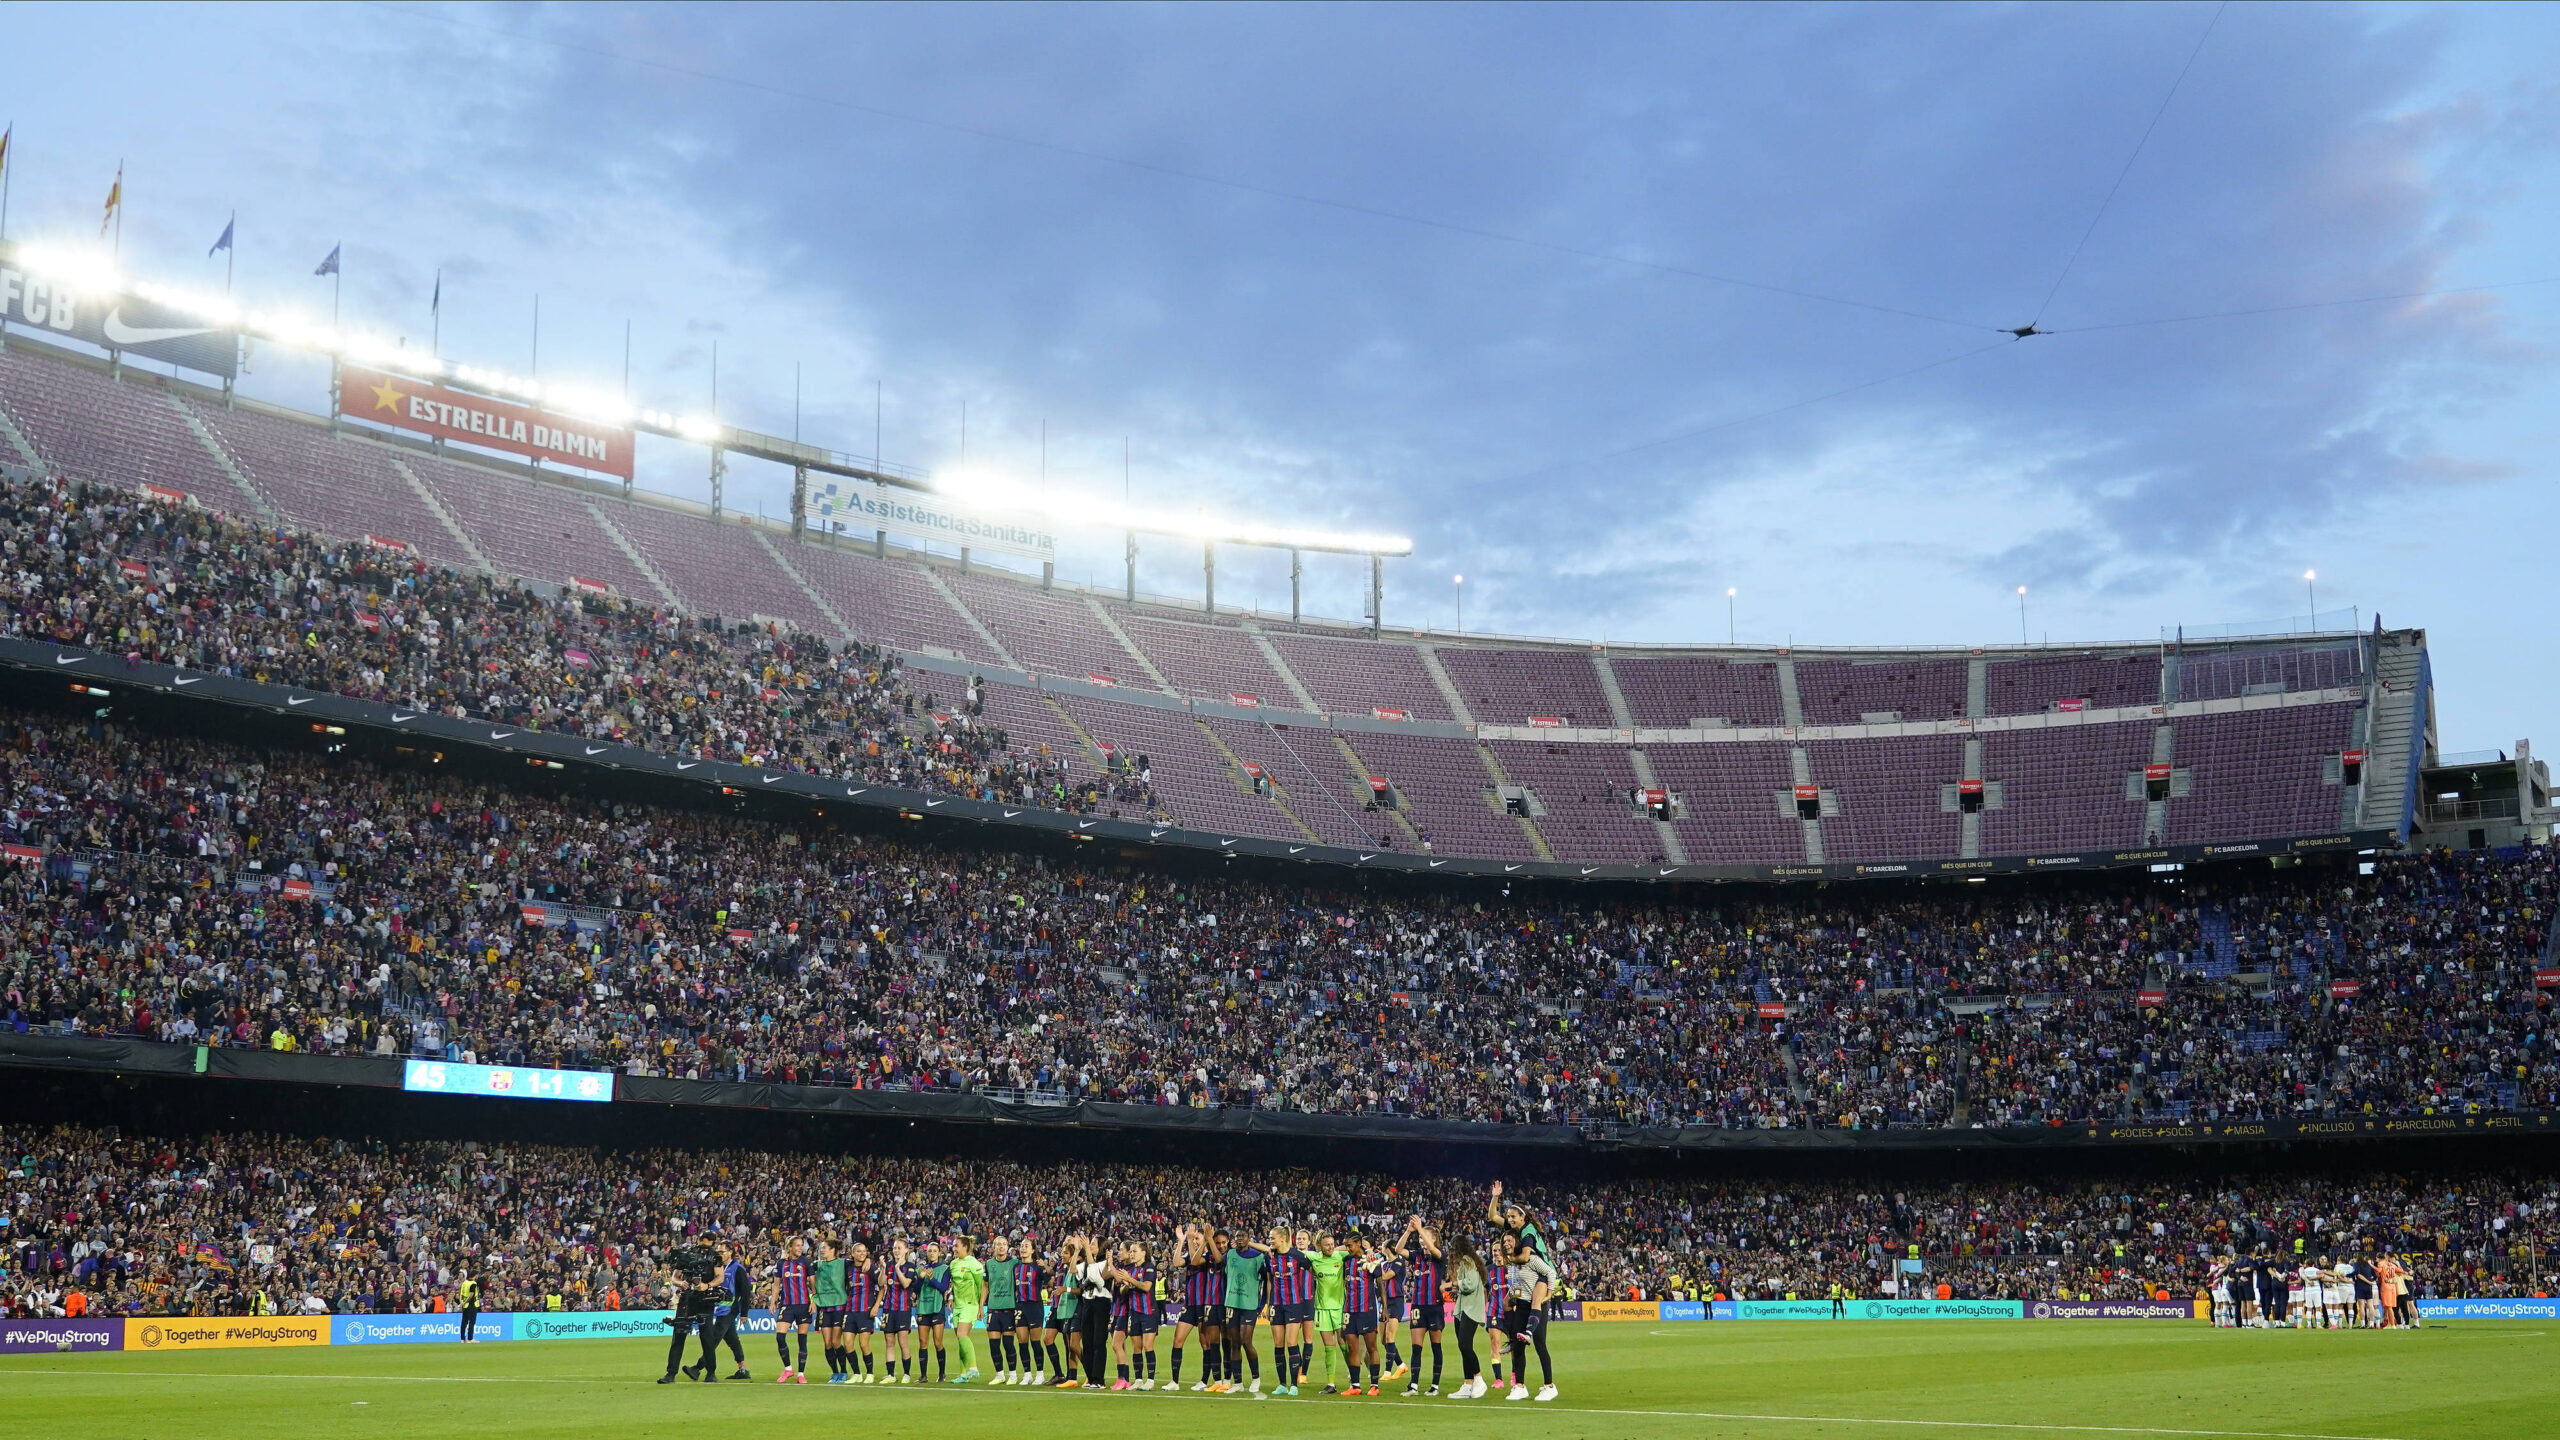 Barcelona Femeni squad line up at Camp Nou after their win over Chelsea Women